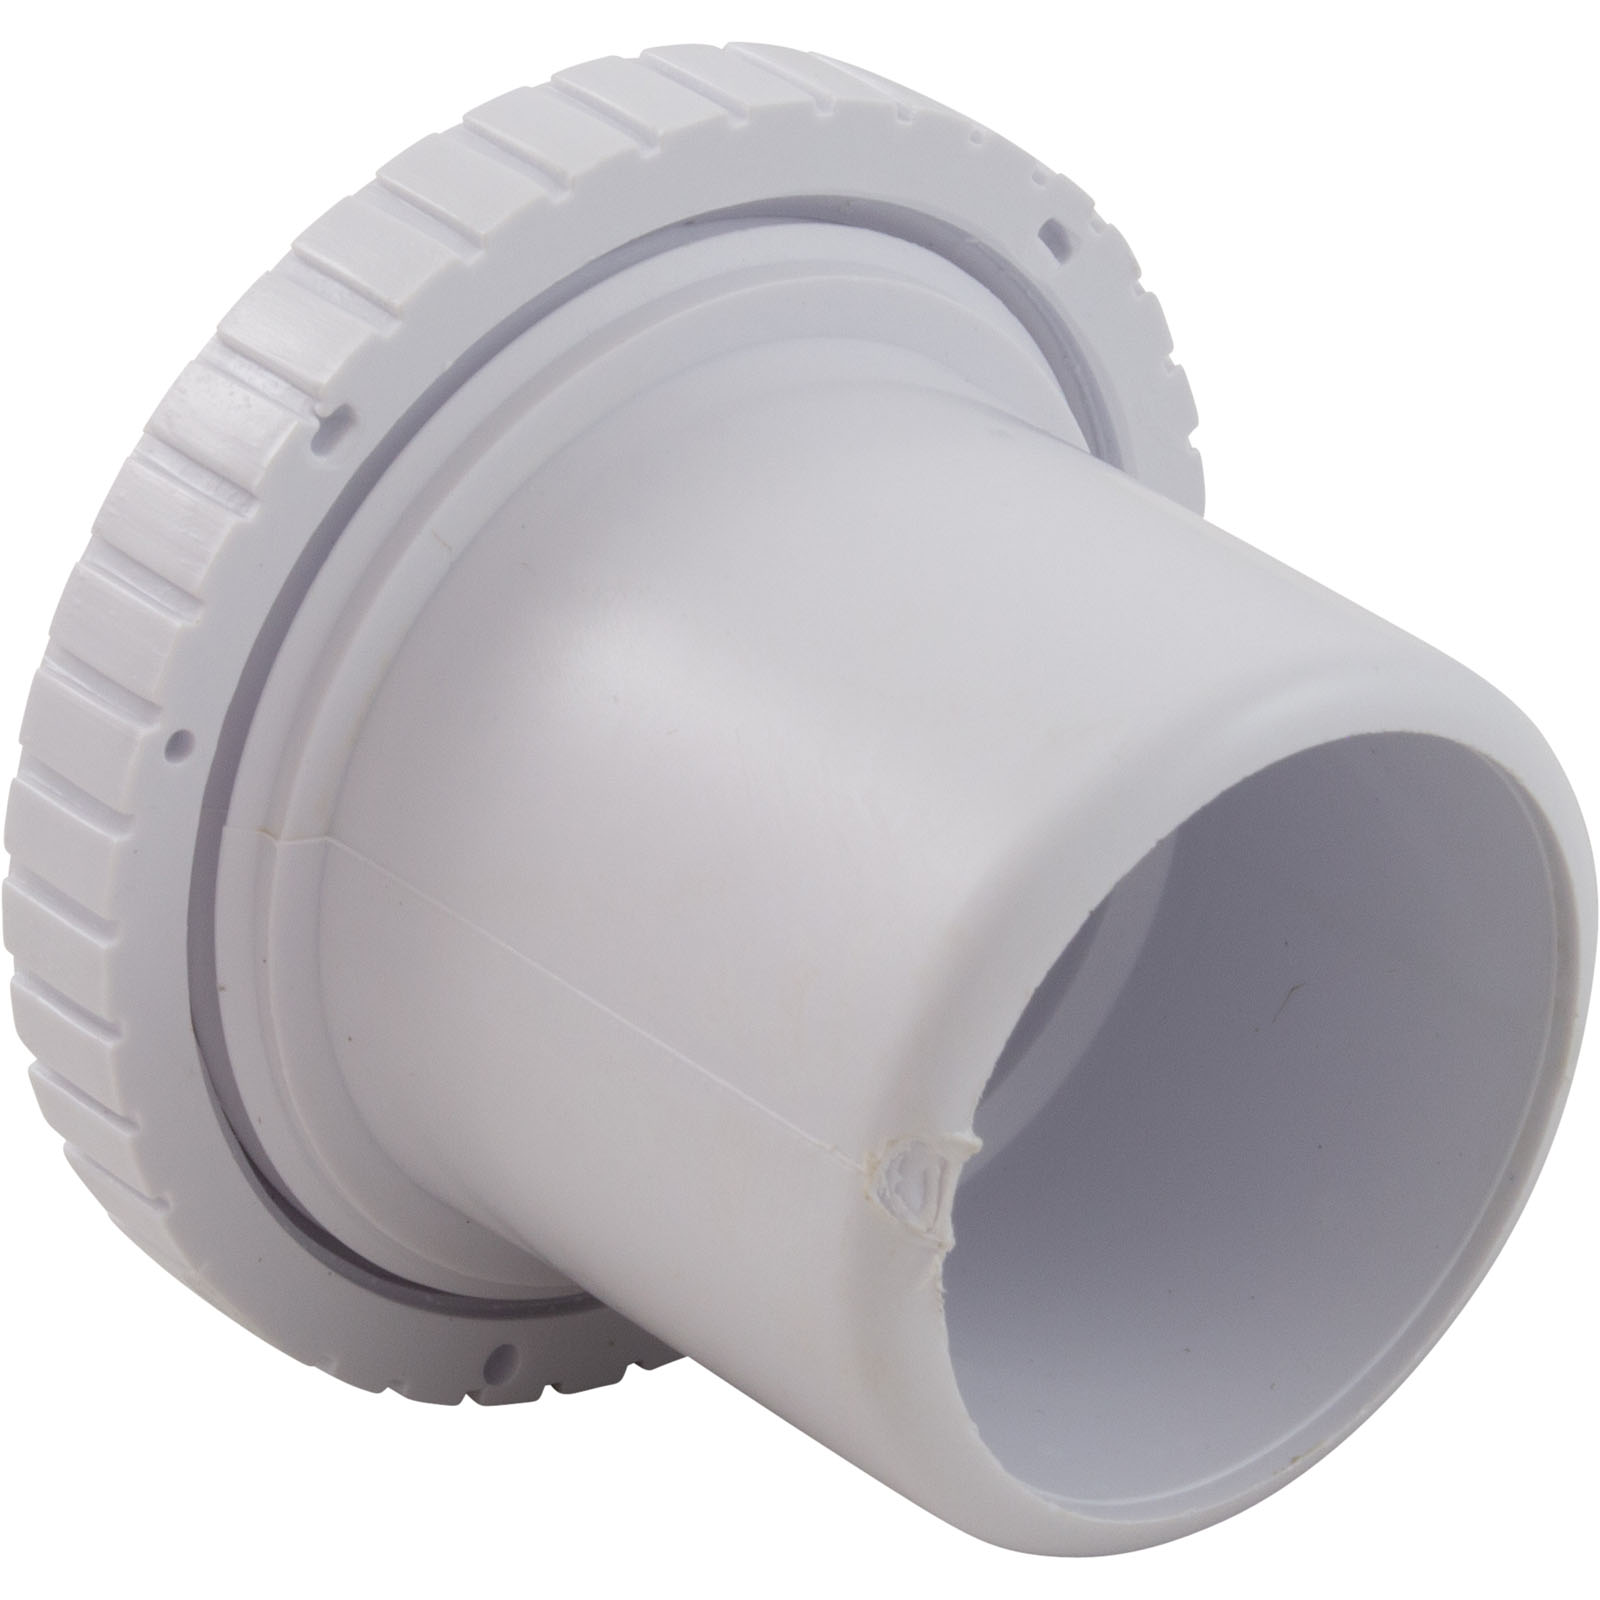 Picture of 25551-000-000 Insert Inlet (1-1/2In Sp X 1In S Slotted Eye) White